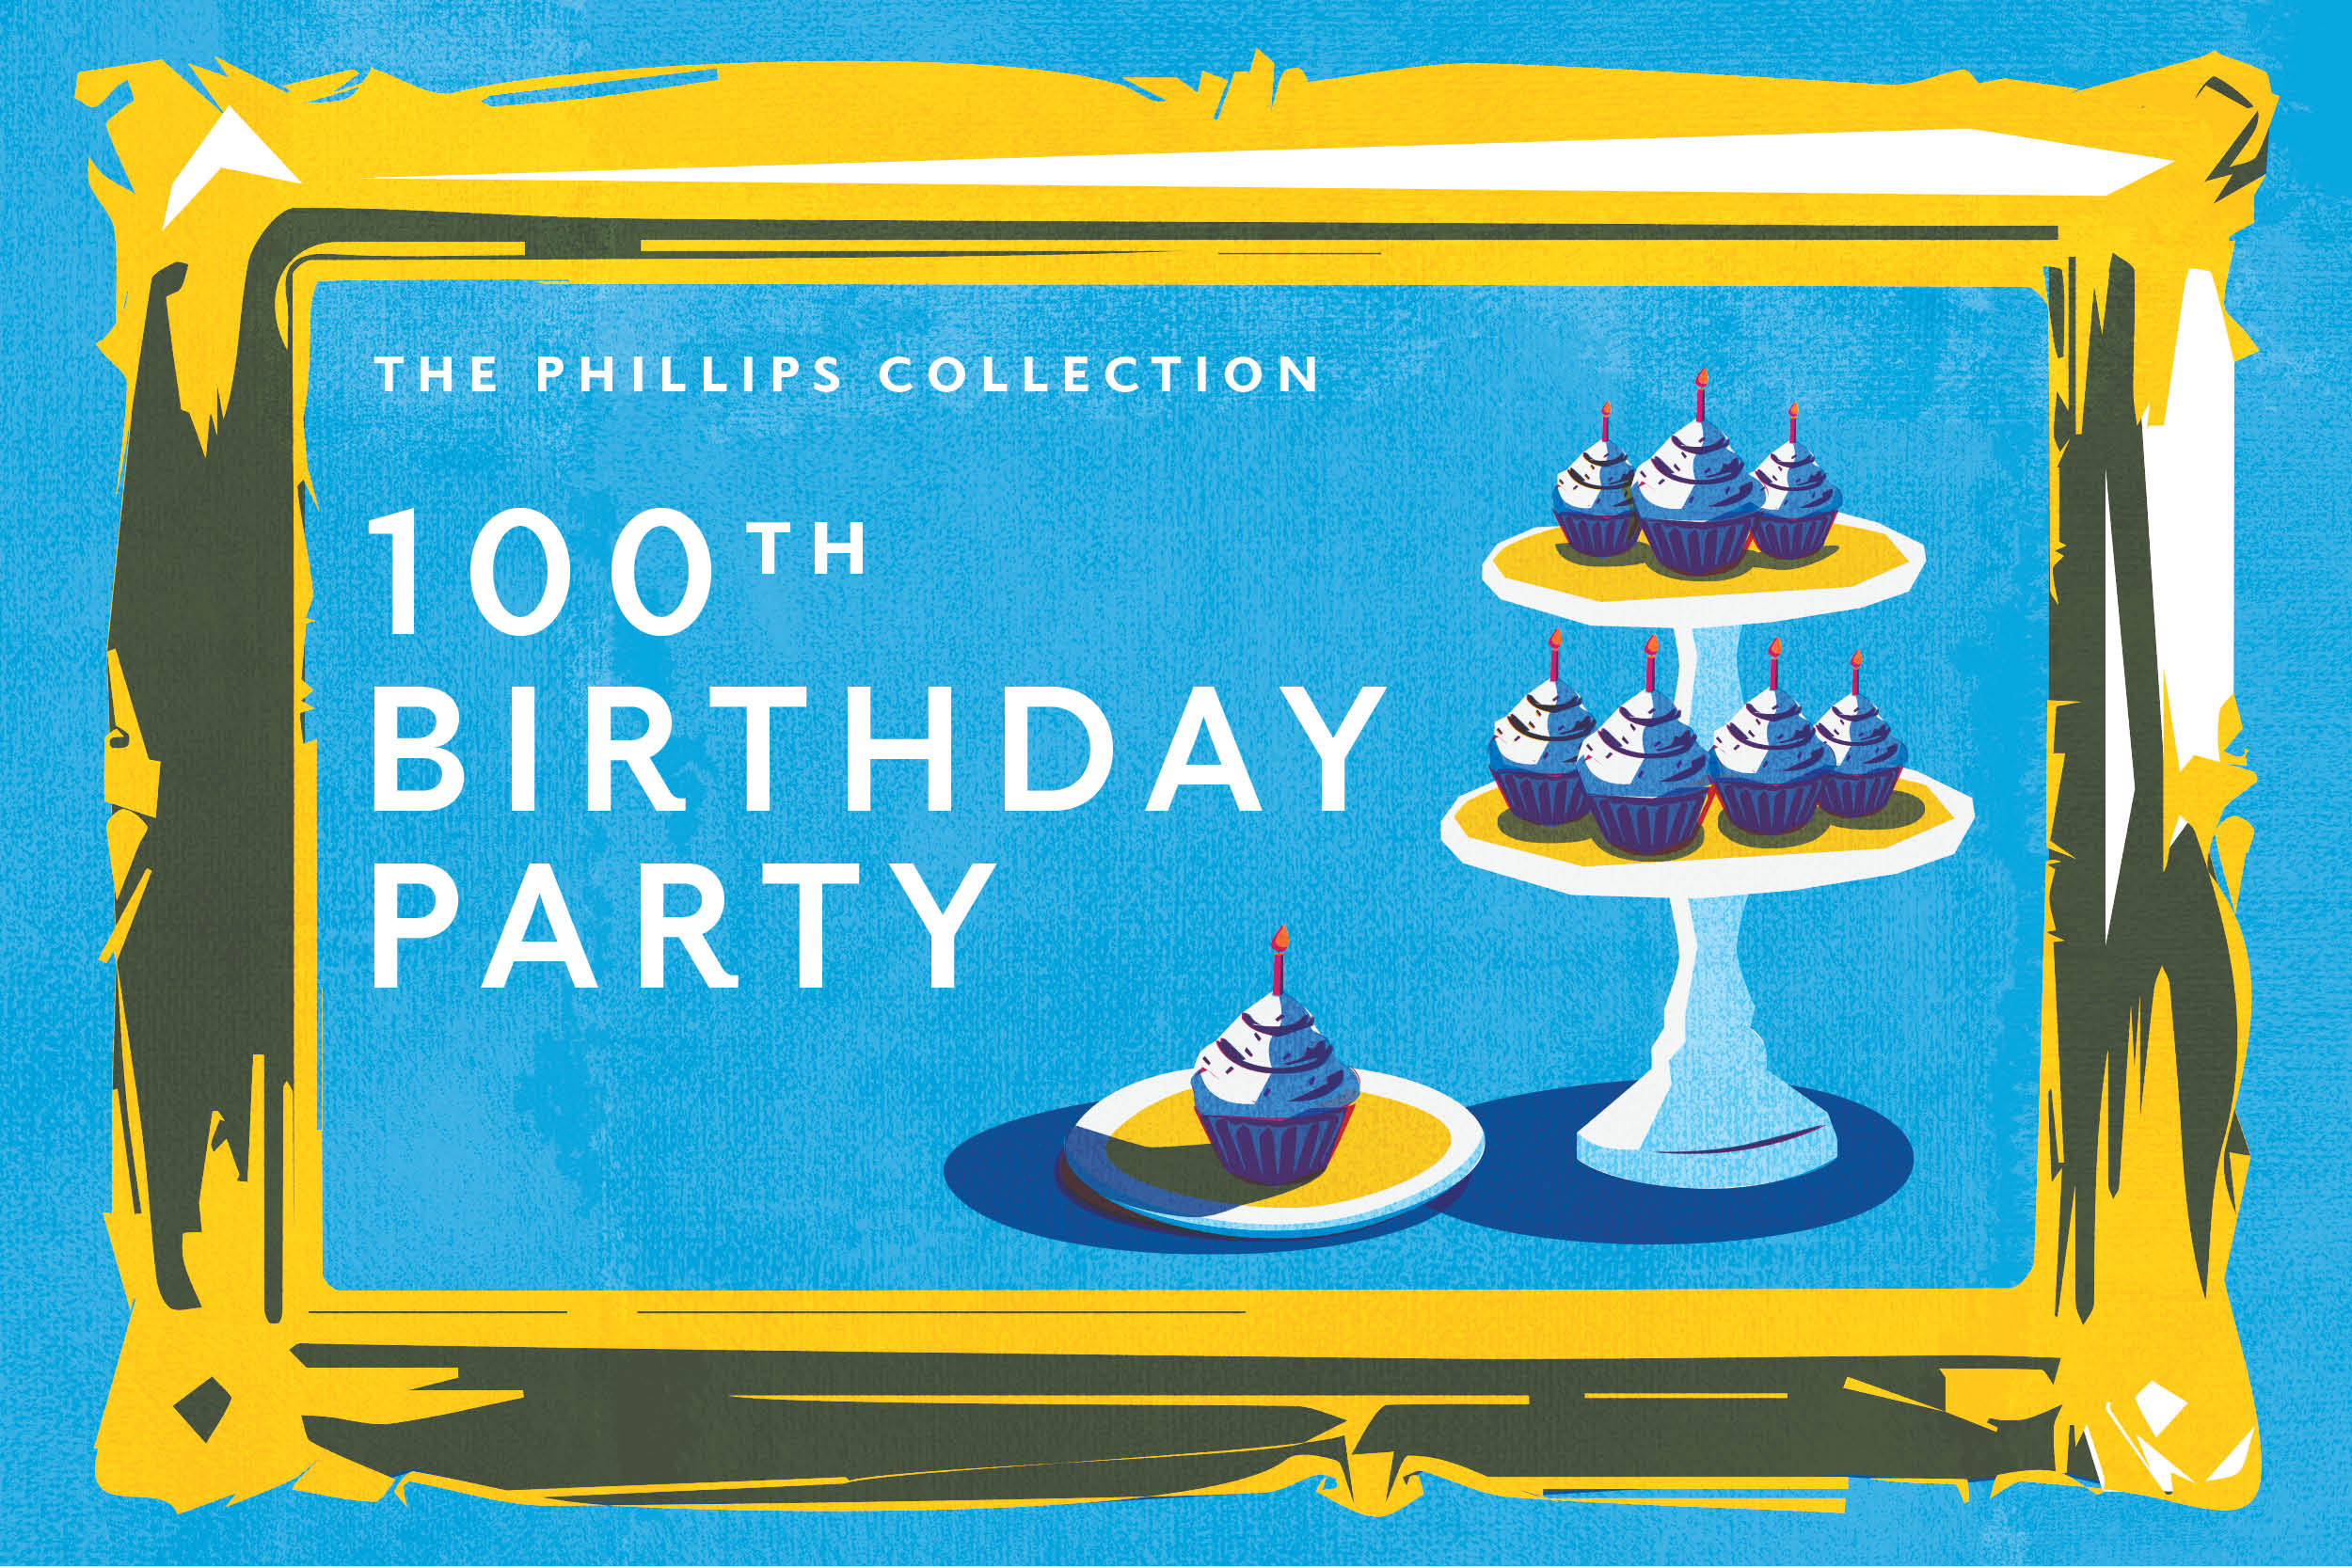 100th Birthday Party | The Phillips Collection